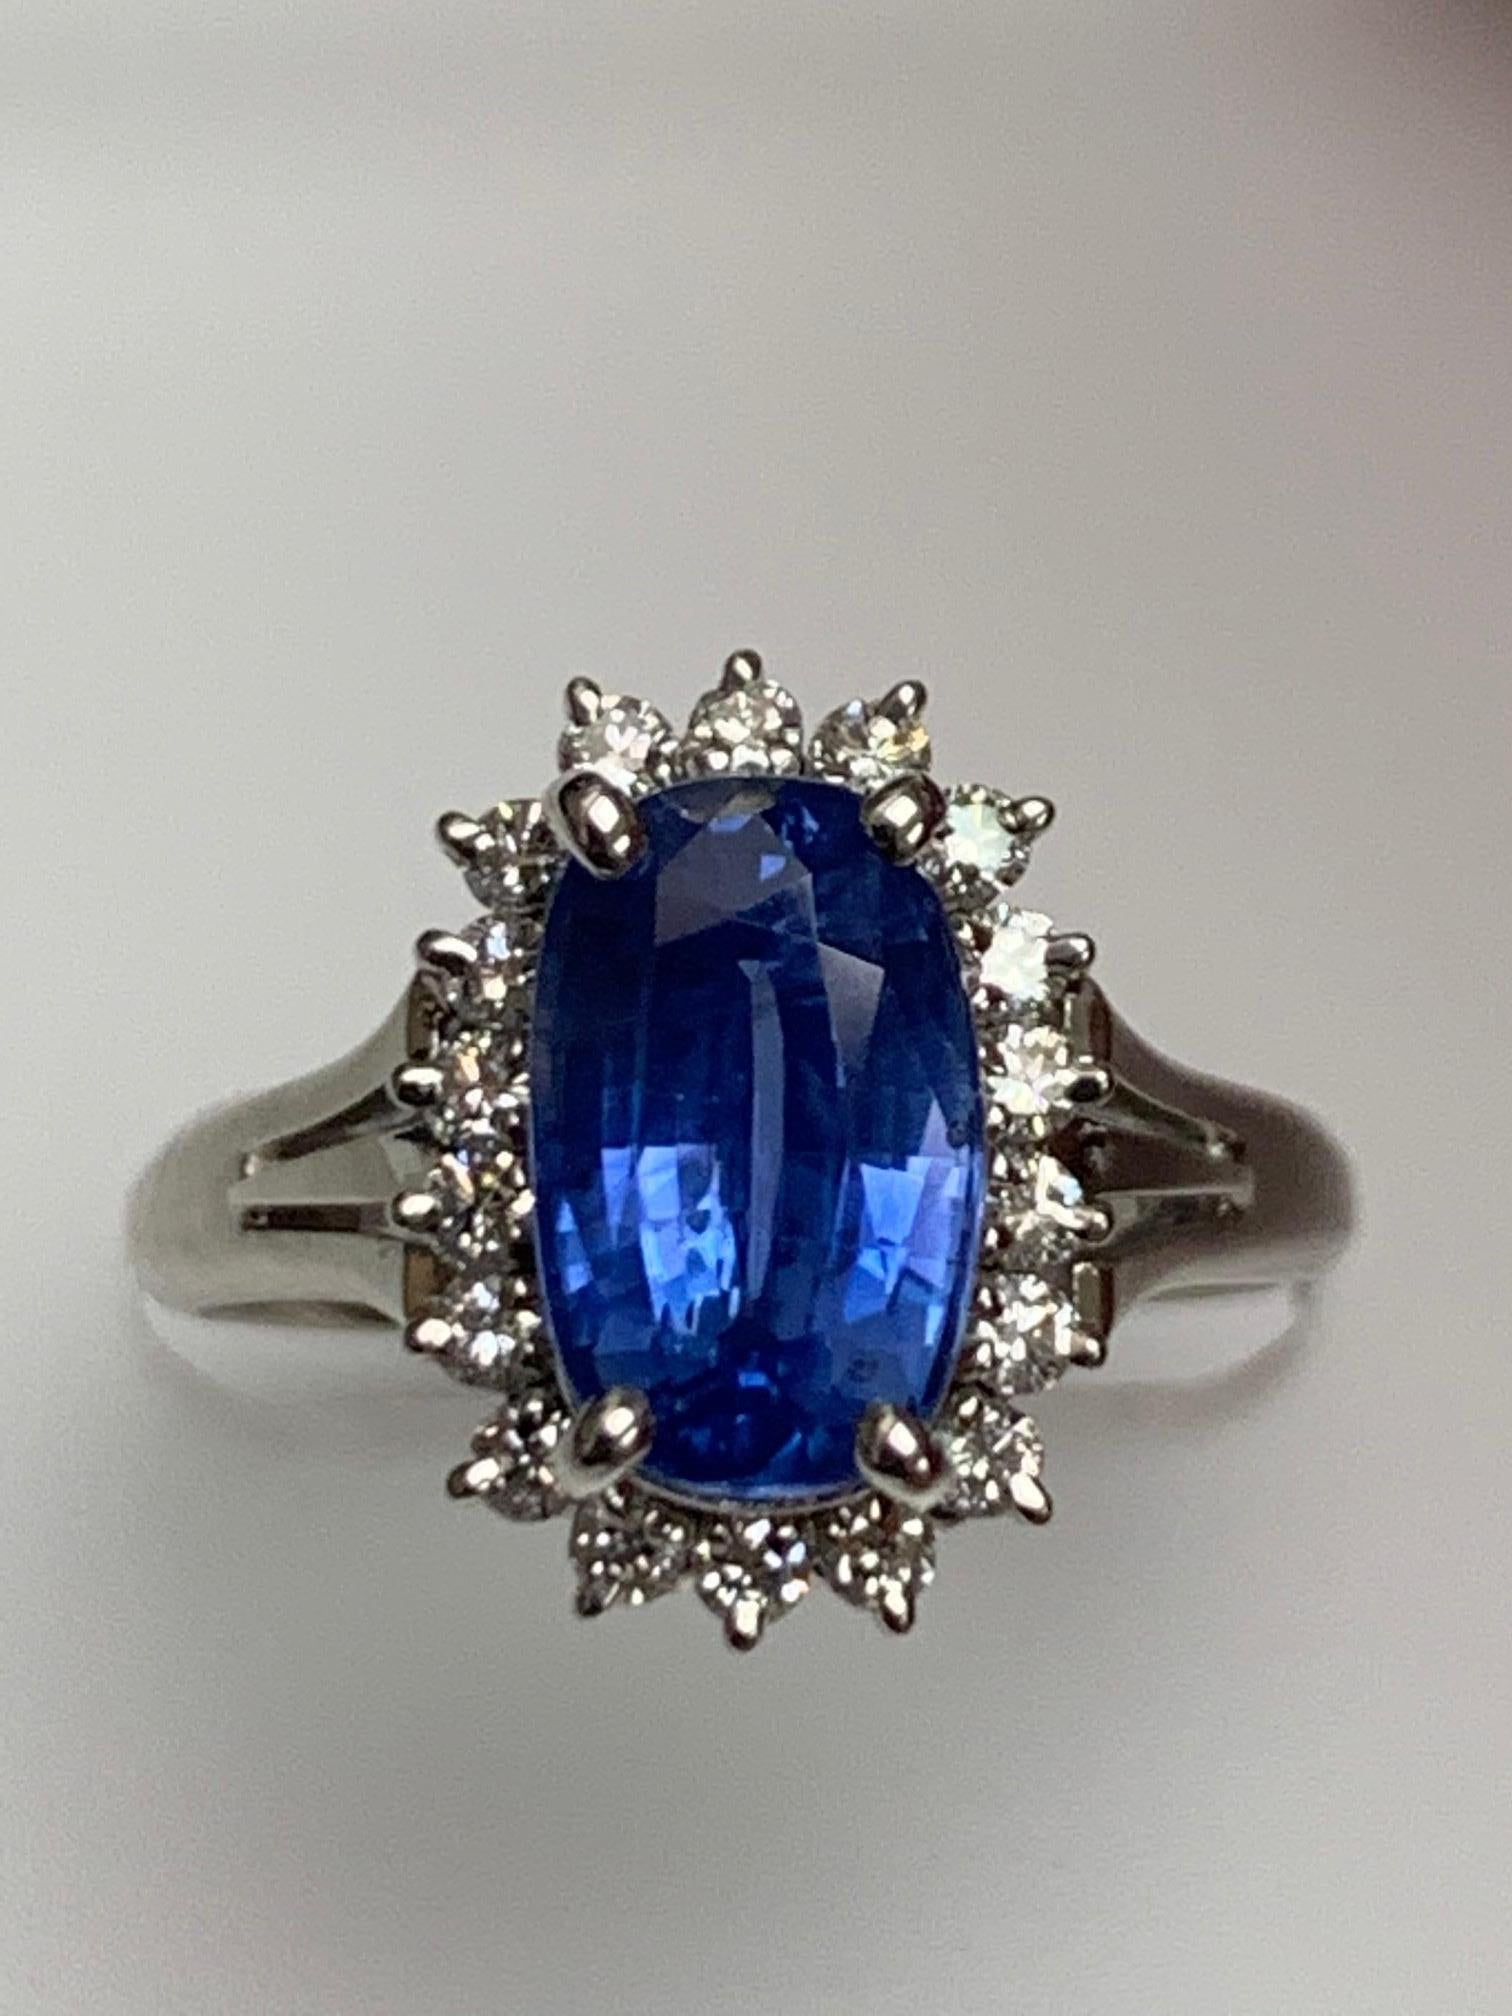 2.83 Carat Natural No heat GIA certified   cushion shape Blue sapphire in cocktail ring surronded with diamonds around .